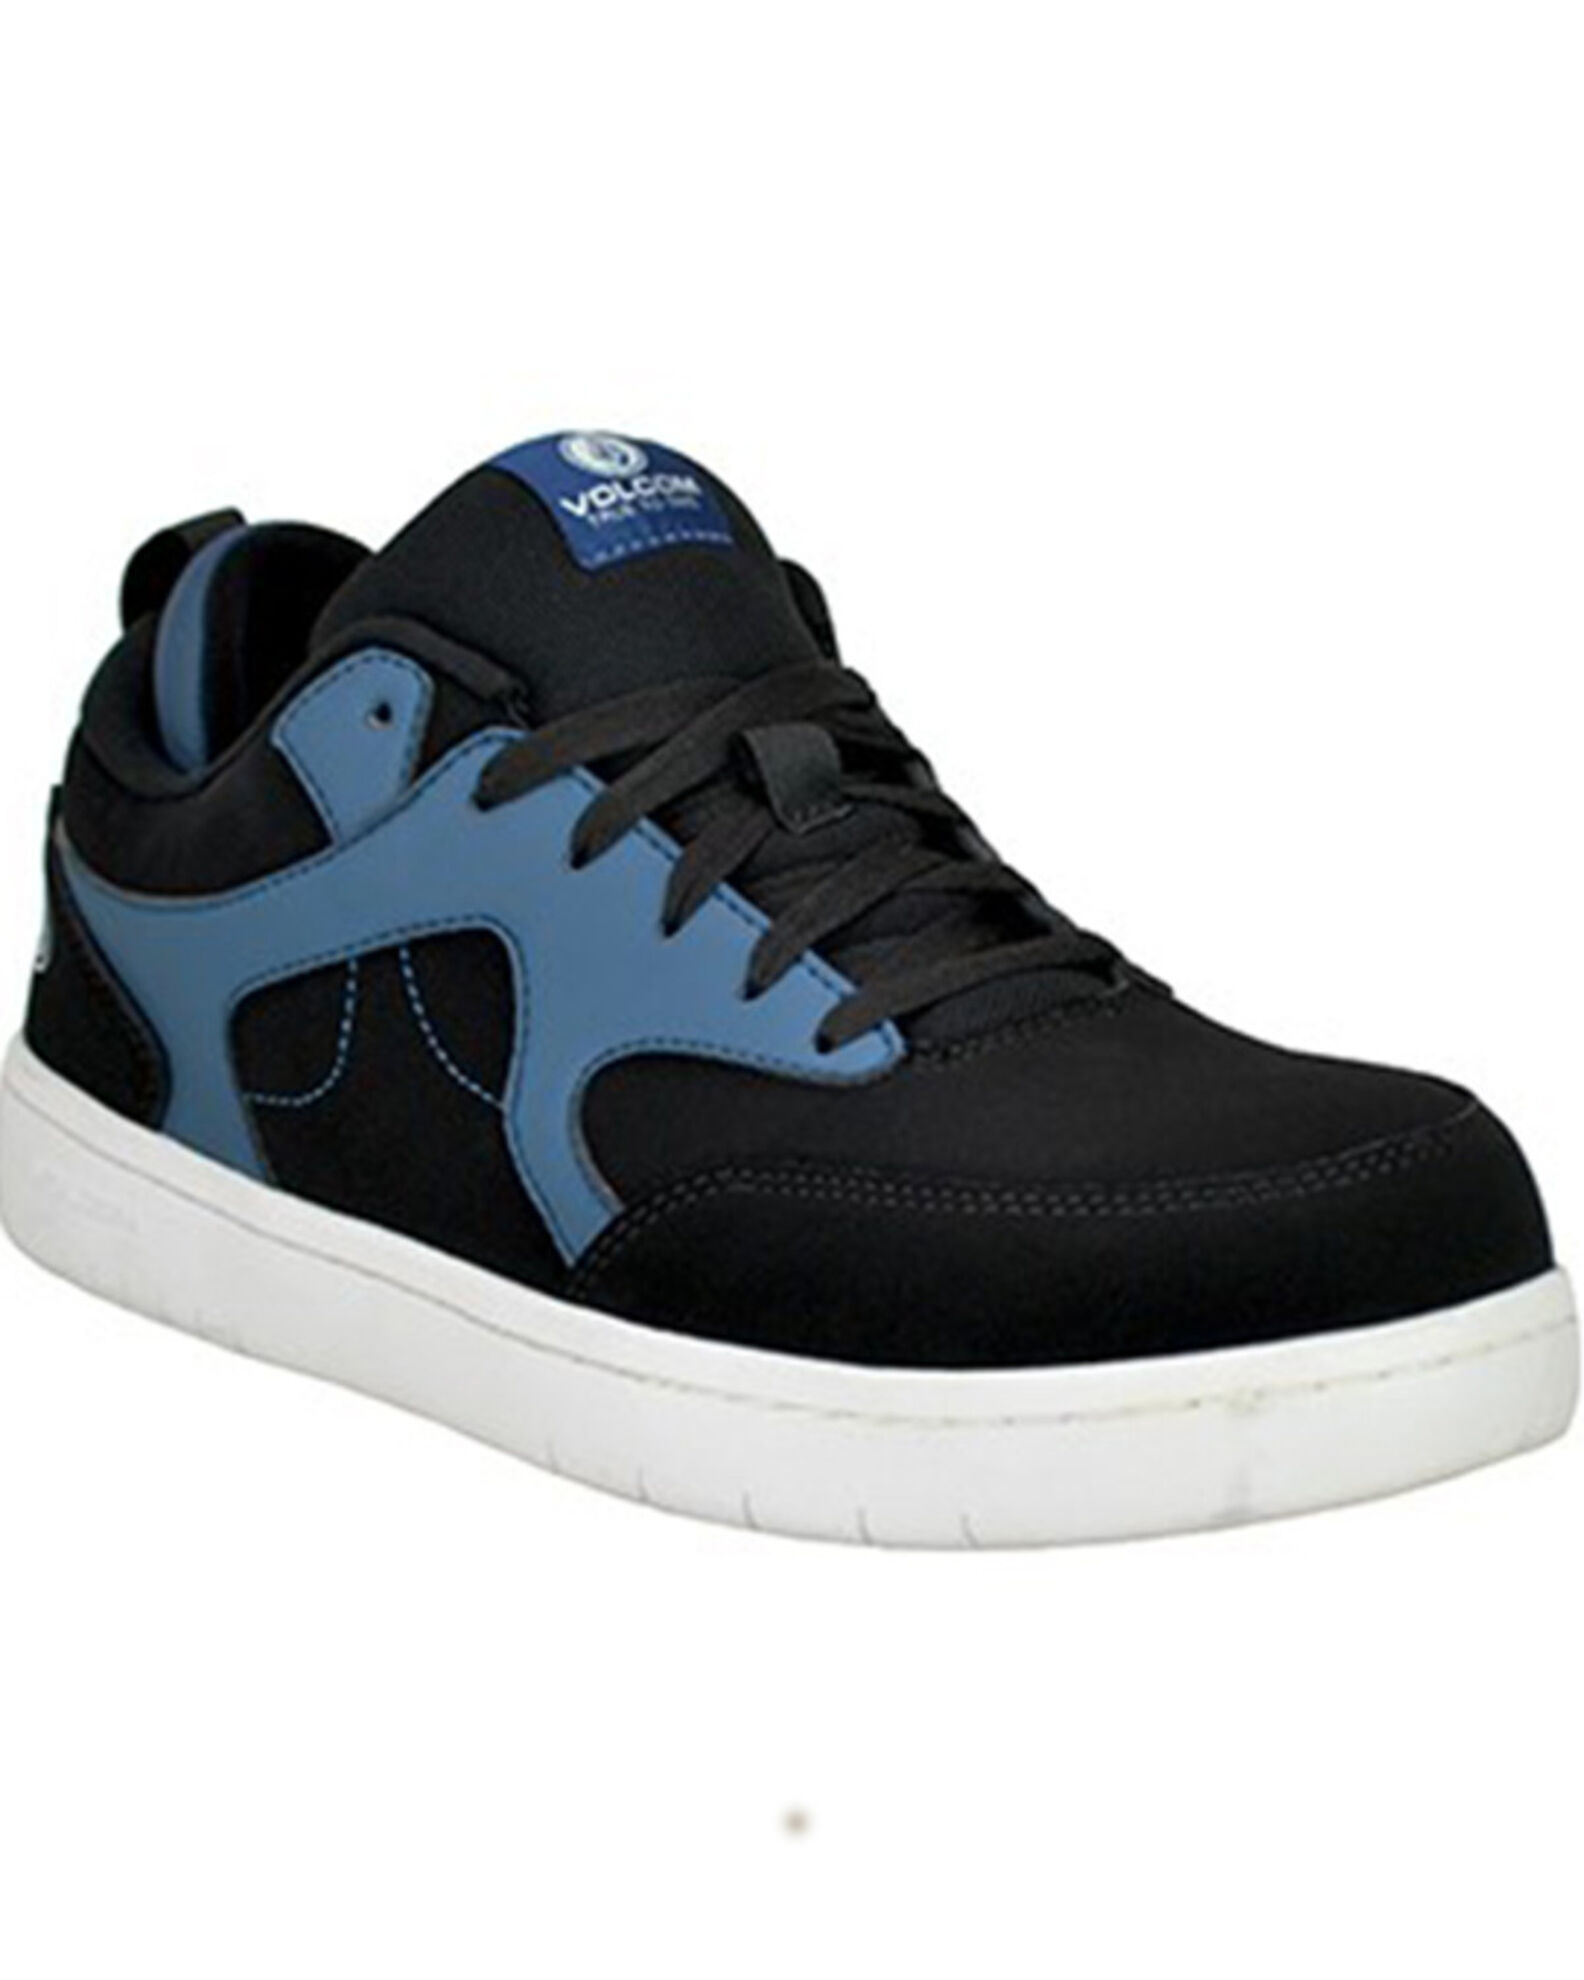 Product Name: Volcom Men's Vitals Skate Inspired Work Shoes - Composite Toe